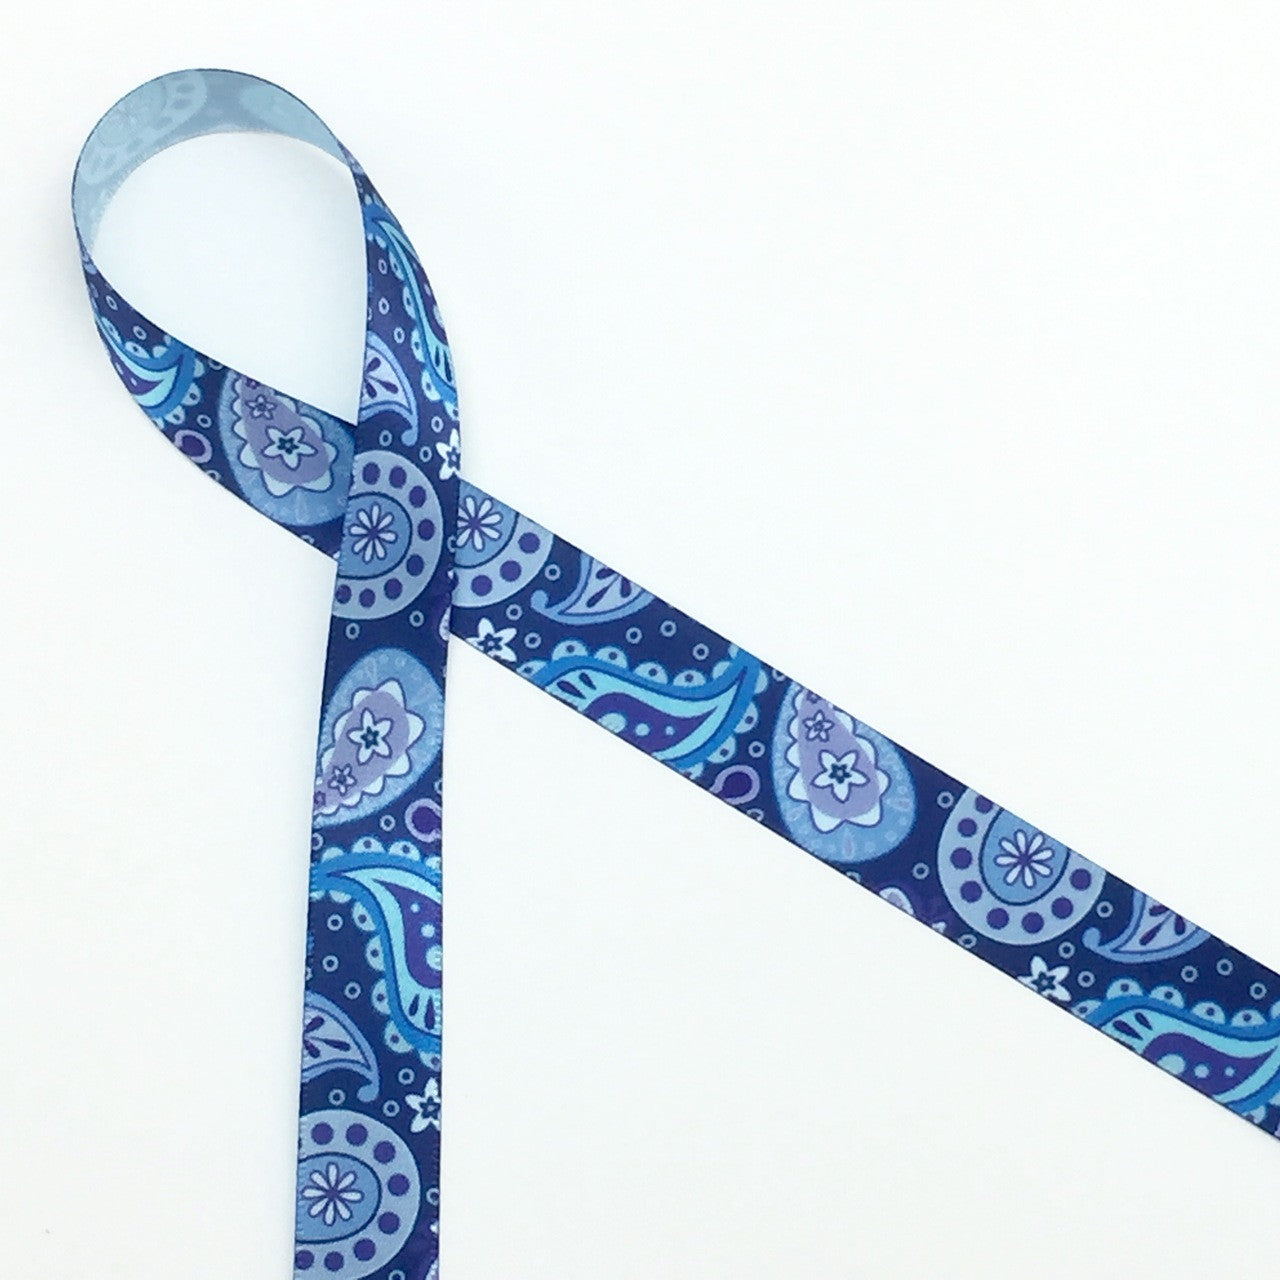 Blue paisley printed on 5/8" Lt. blue single face satin ribbon is a versatile ribbon for themes from Mother's Day and Father's Day to a casual wedding!